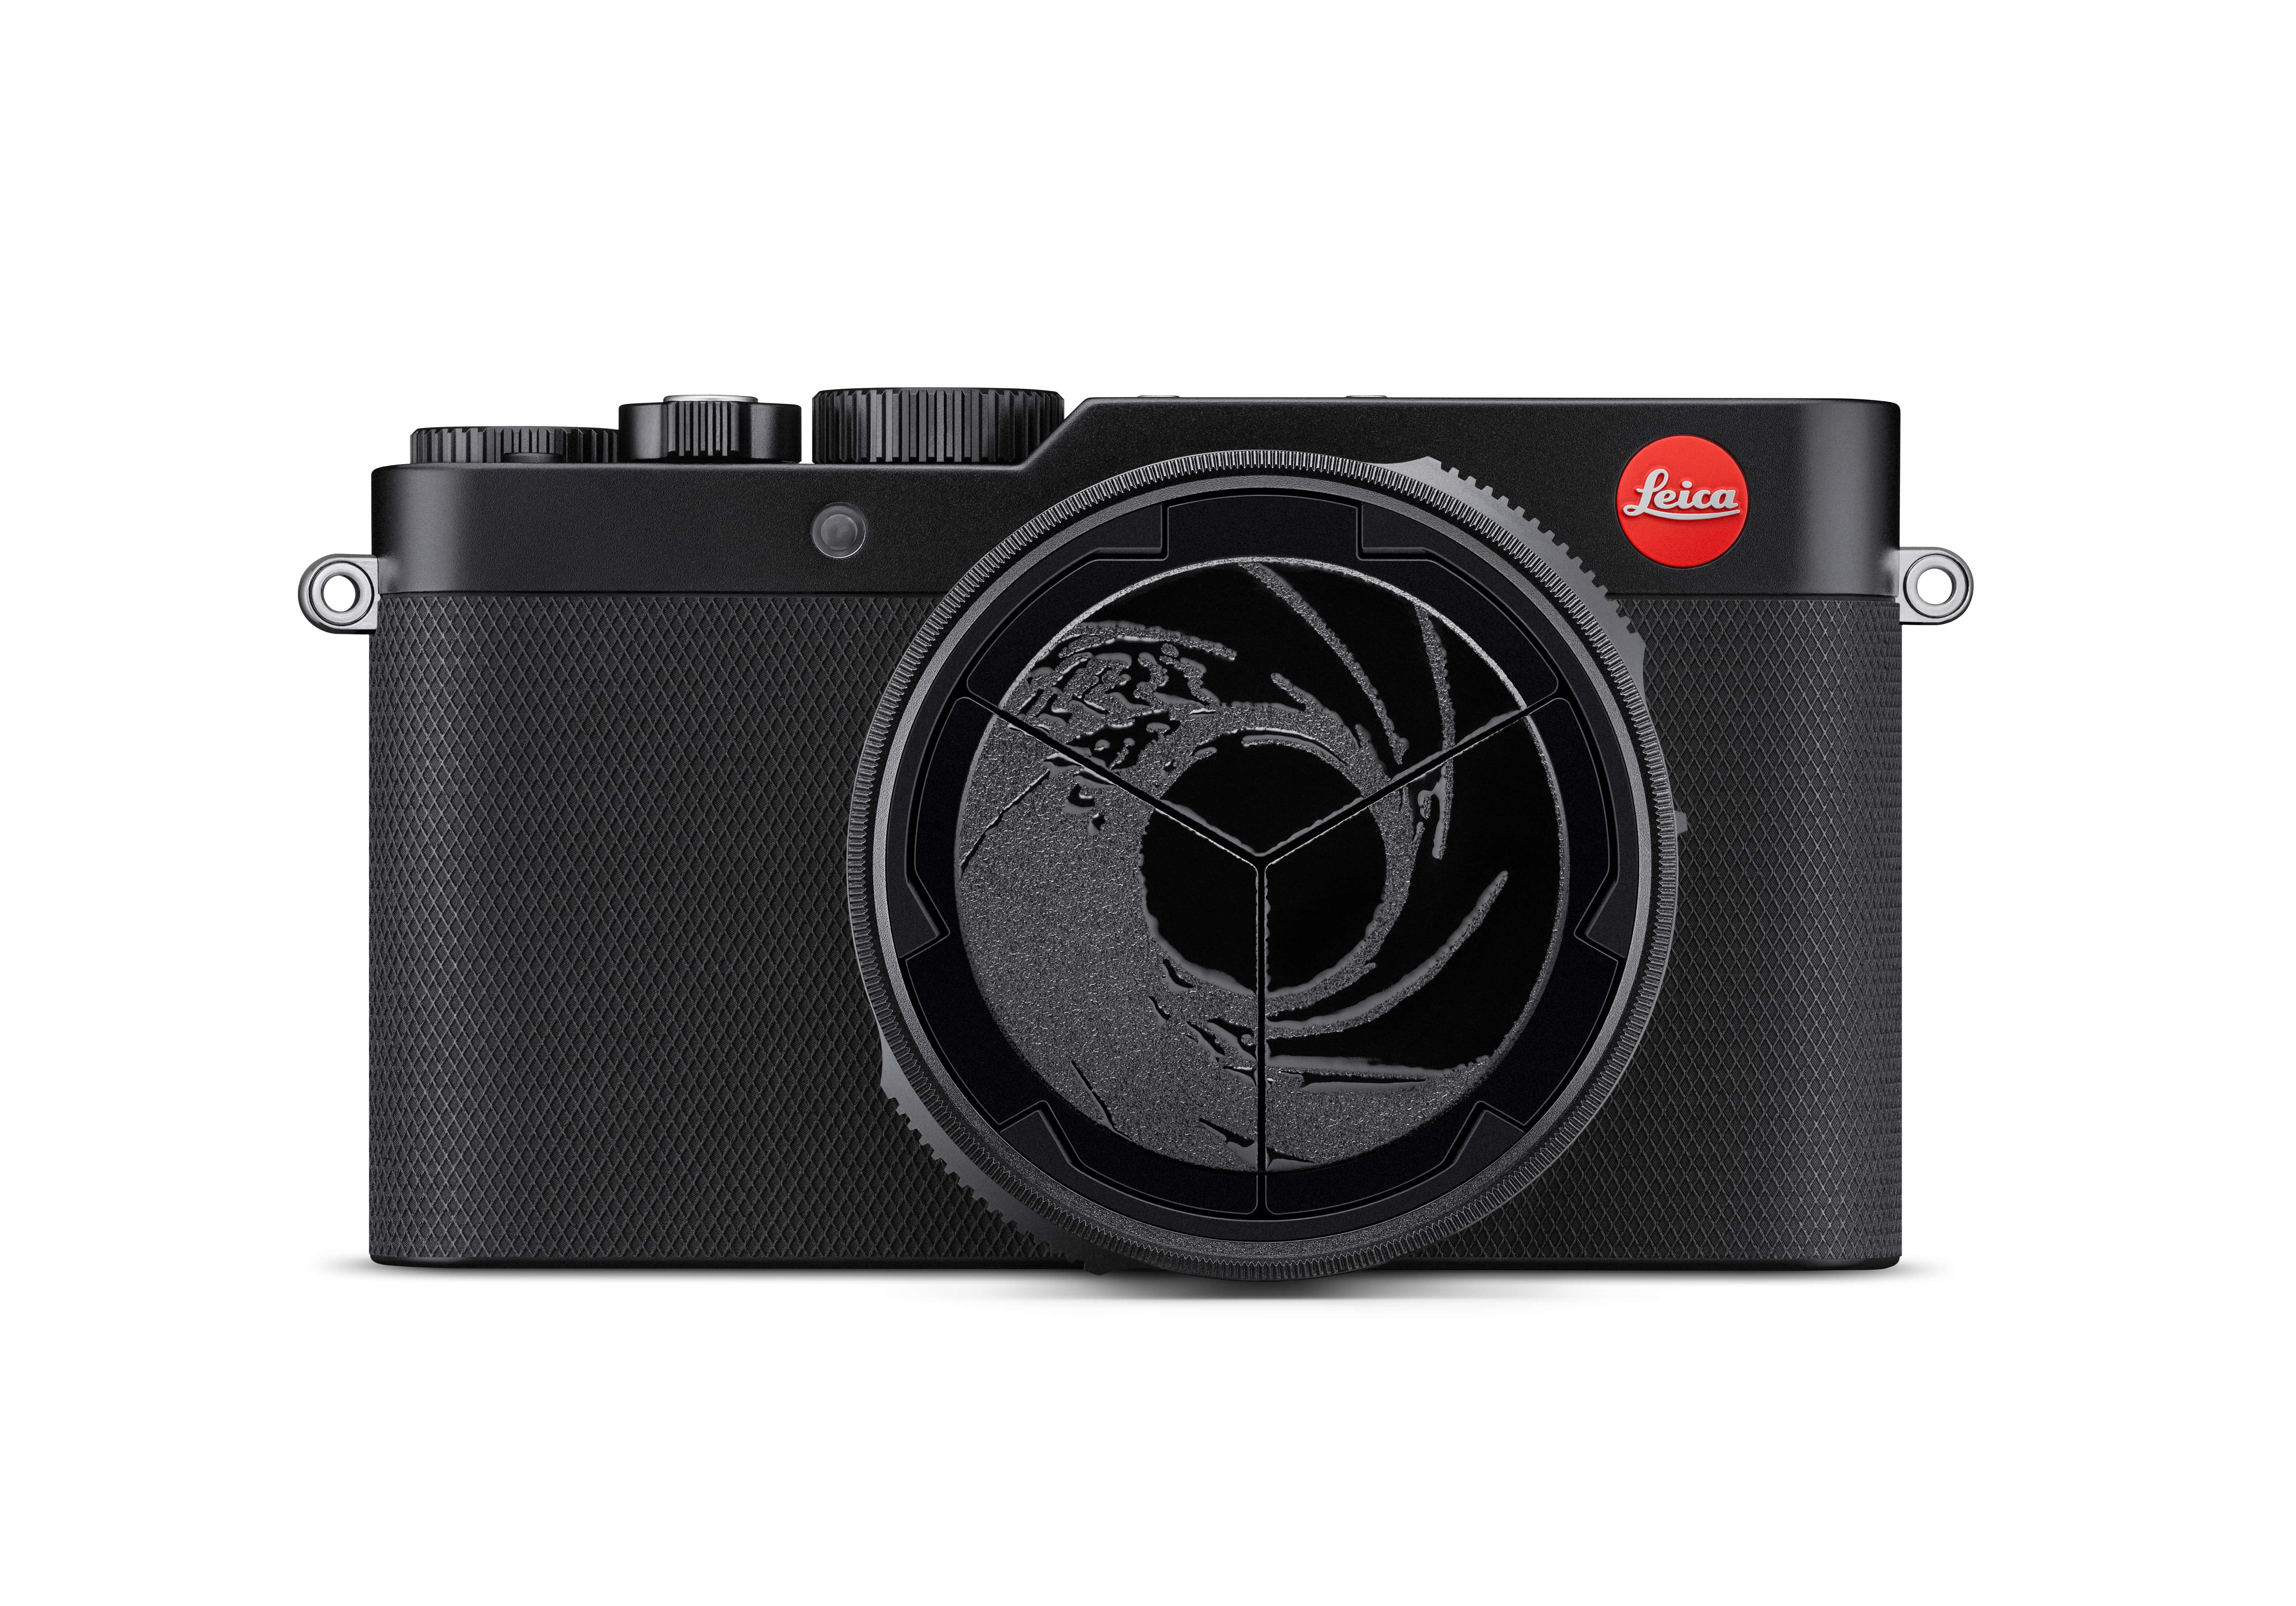 LEICA D-LUX 7 007 Edition 19185